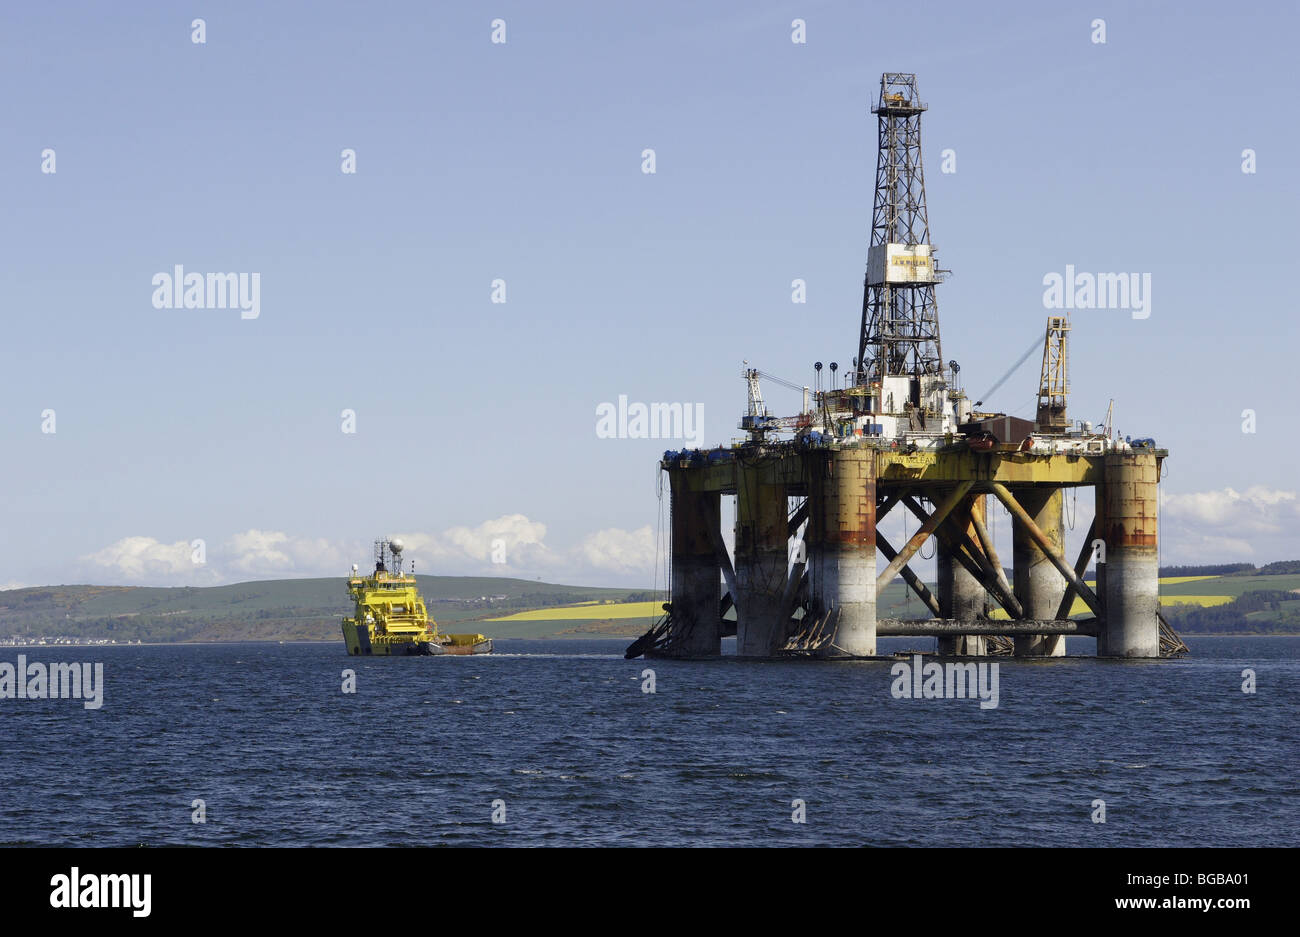 Scotland, Invergordon.  Oil rig platform being pulled out to sea by tug vessel. Stock Photo